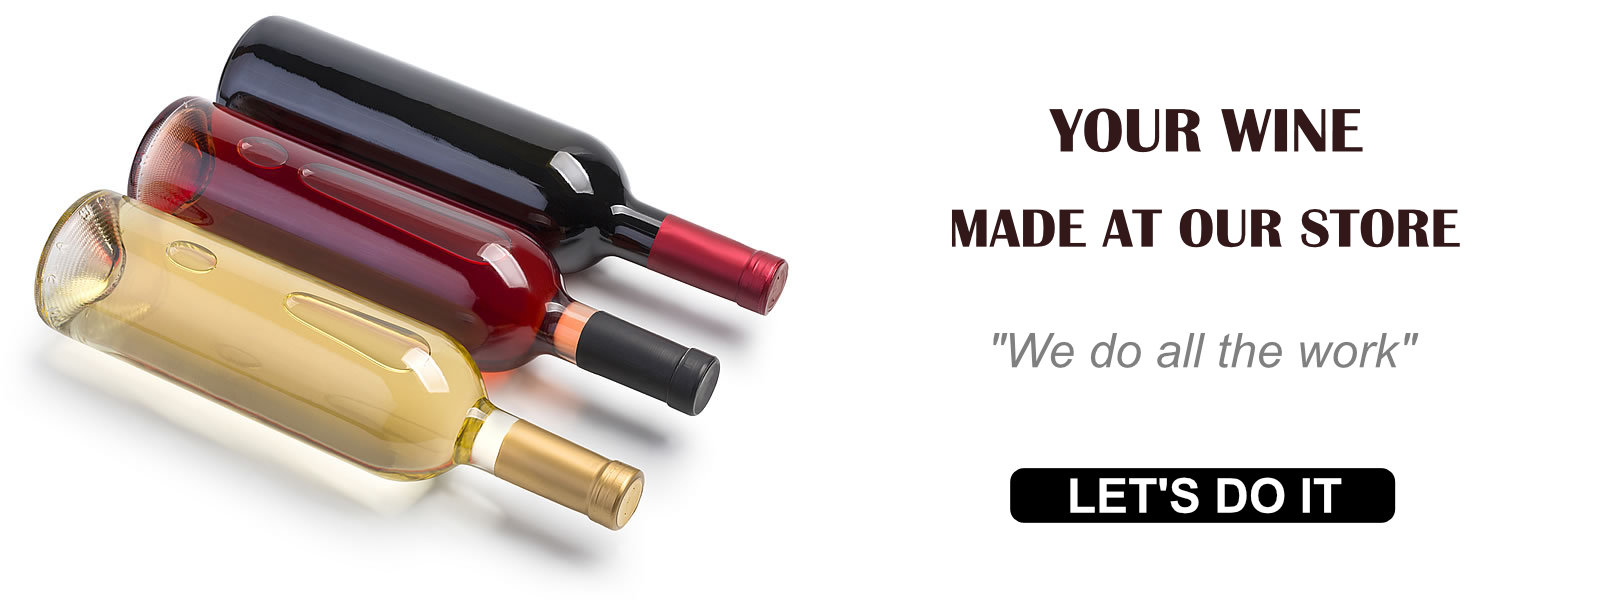 wine made for you on our premises